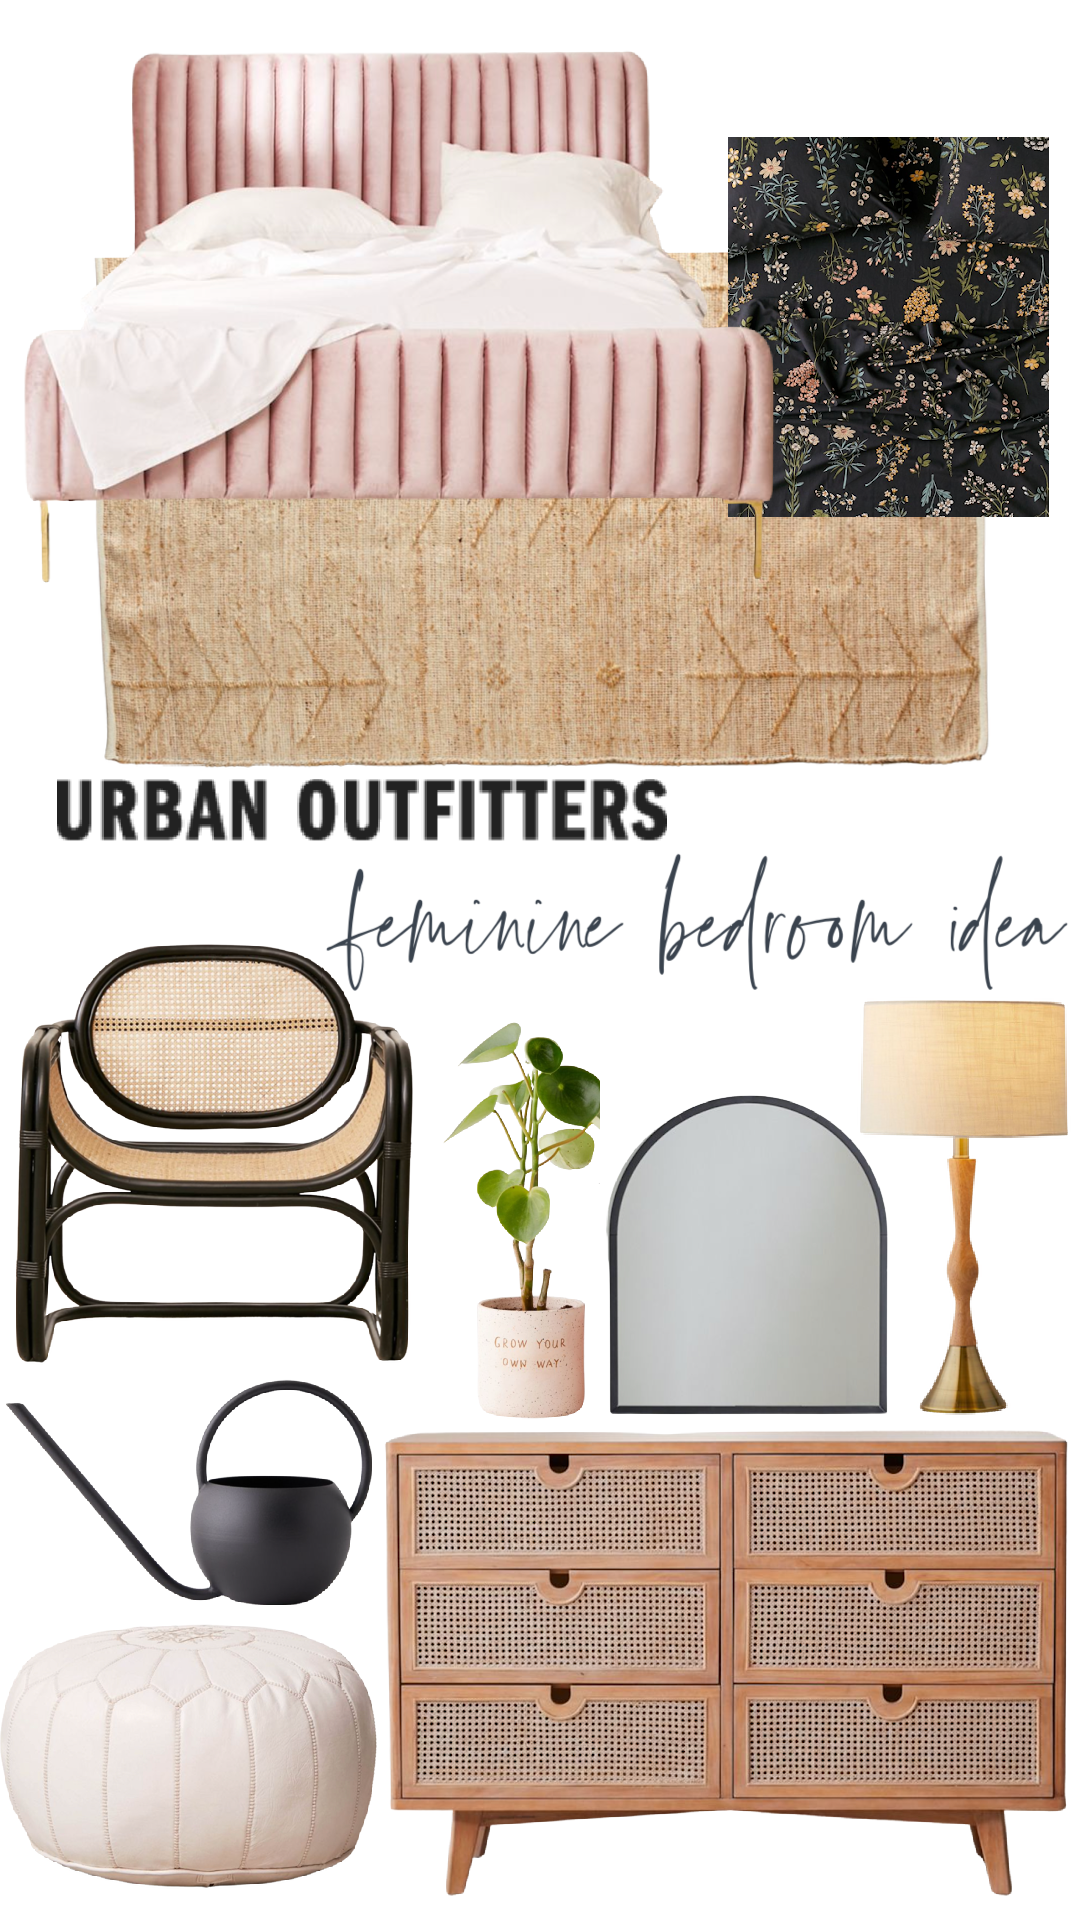 Urban Outfitter Home Favorites and Bedroom Ideas